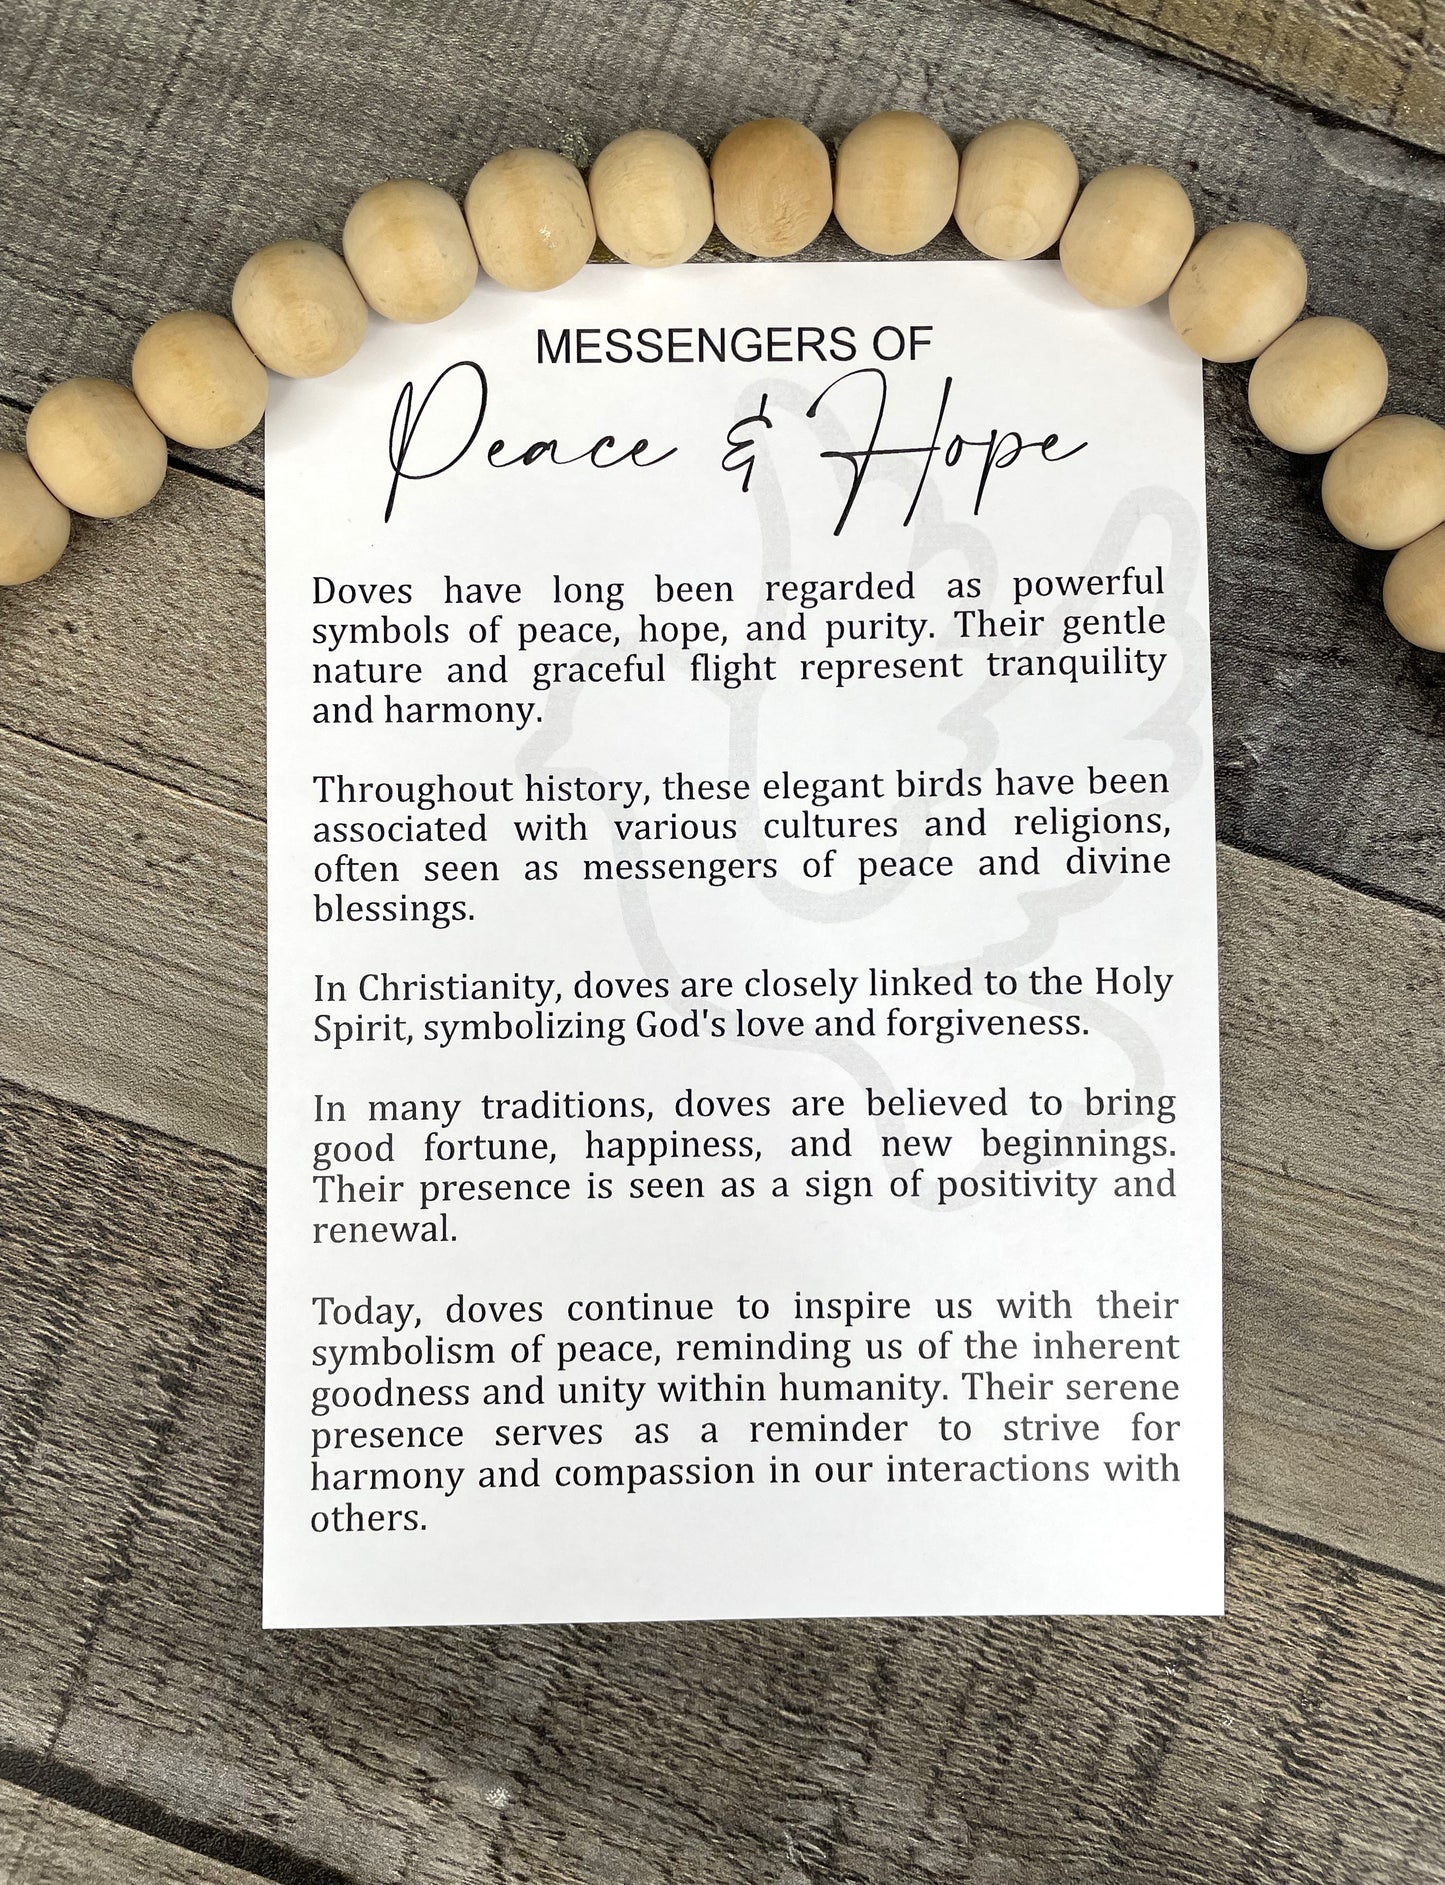 Dove Story Ornament: Messengers of Peace and Love